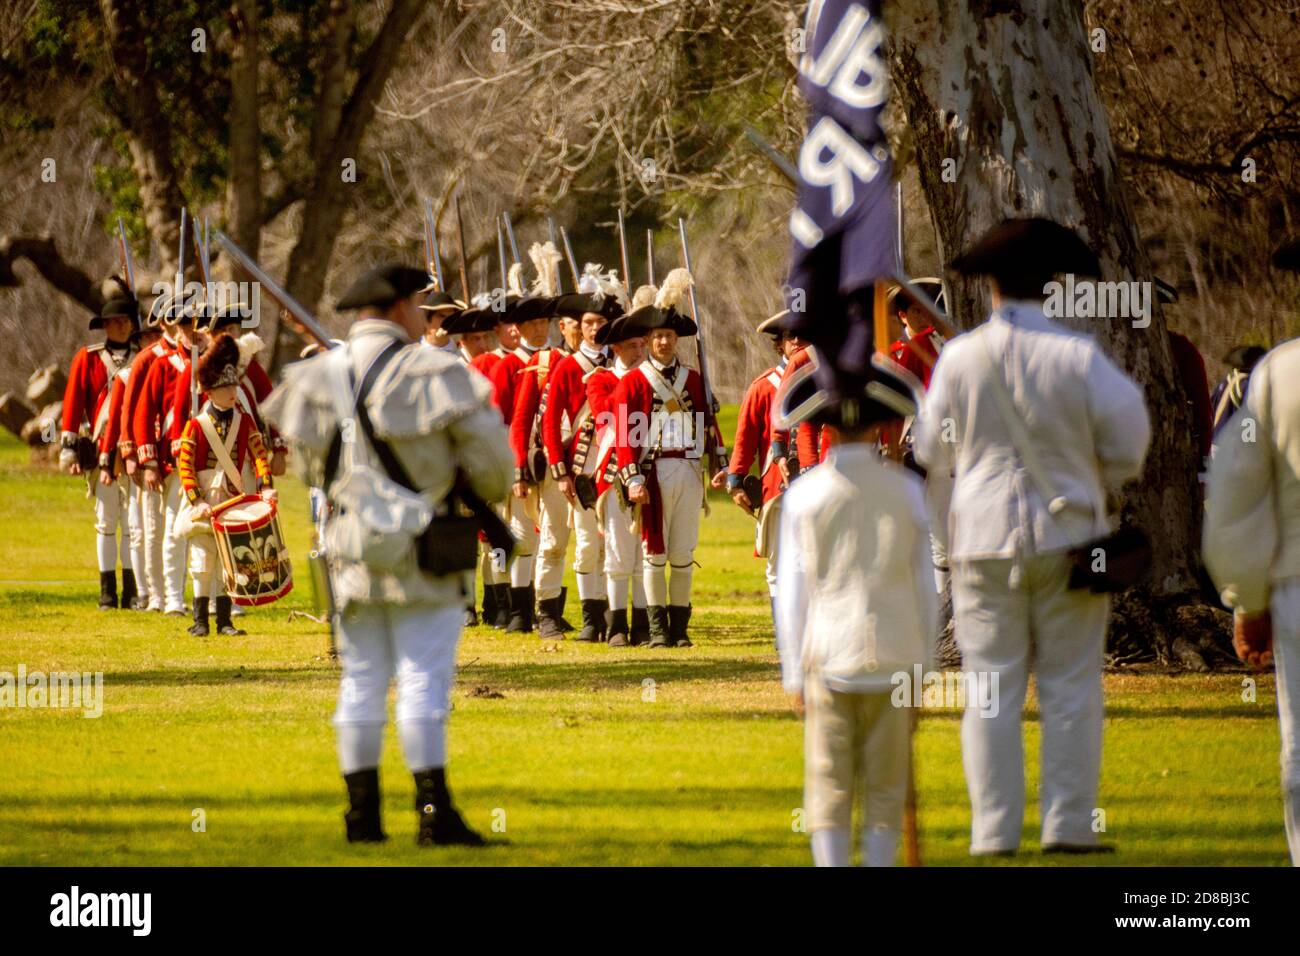 Holding a 'Liberty' flag, actors portraying American rebels confront Redcoats at historical reenactment of an American Revolutionary War in a Huntingt Stock Photo